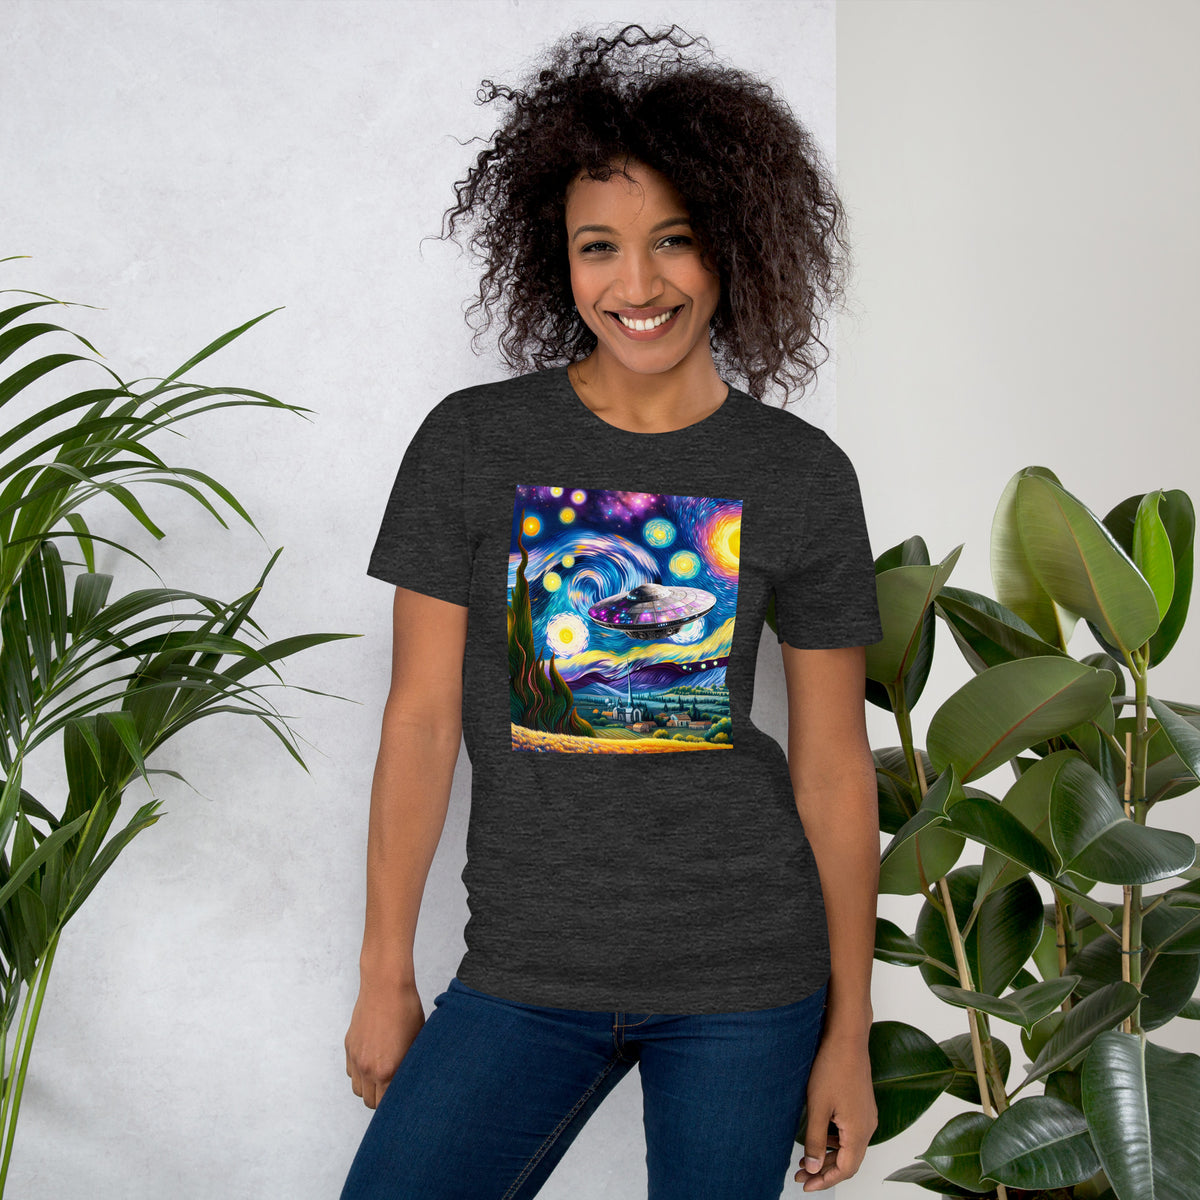 Spaceship UFO Shirt, Van Gogh-Inspired- Alien Invasion Tee, Galaxy & Conspiracy Theme, Funny Gift for Sci-Fi Fans